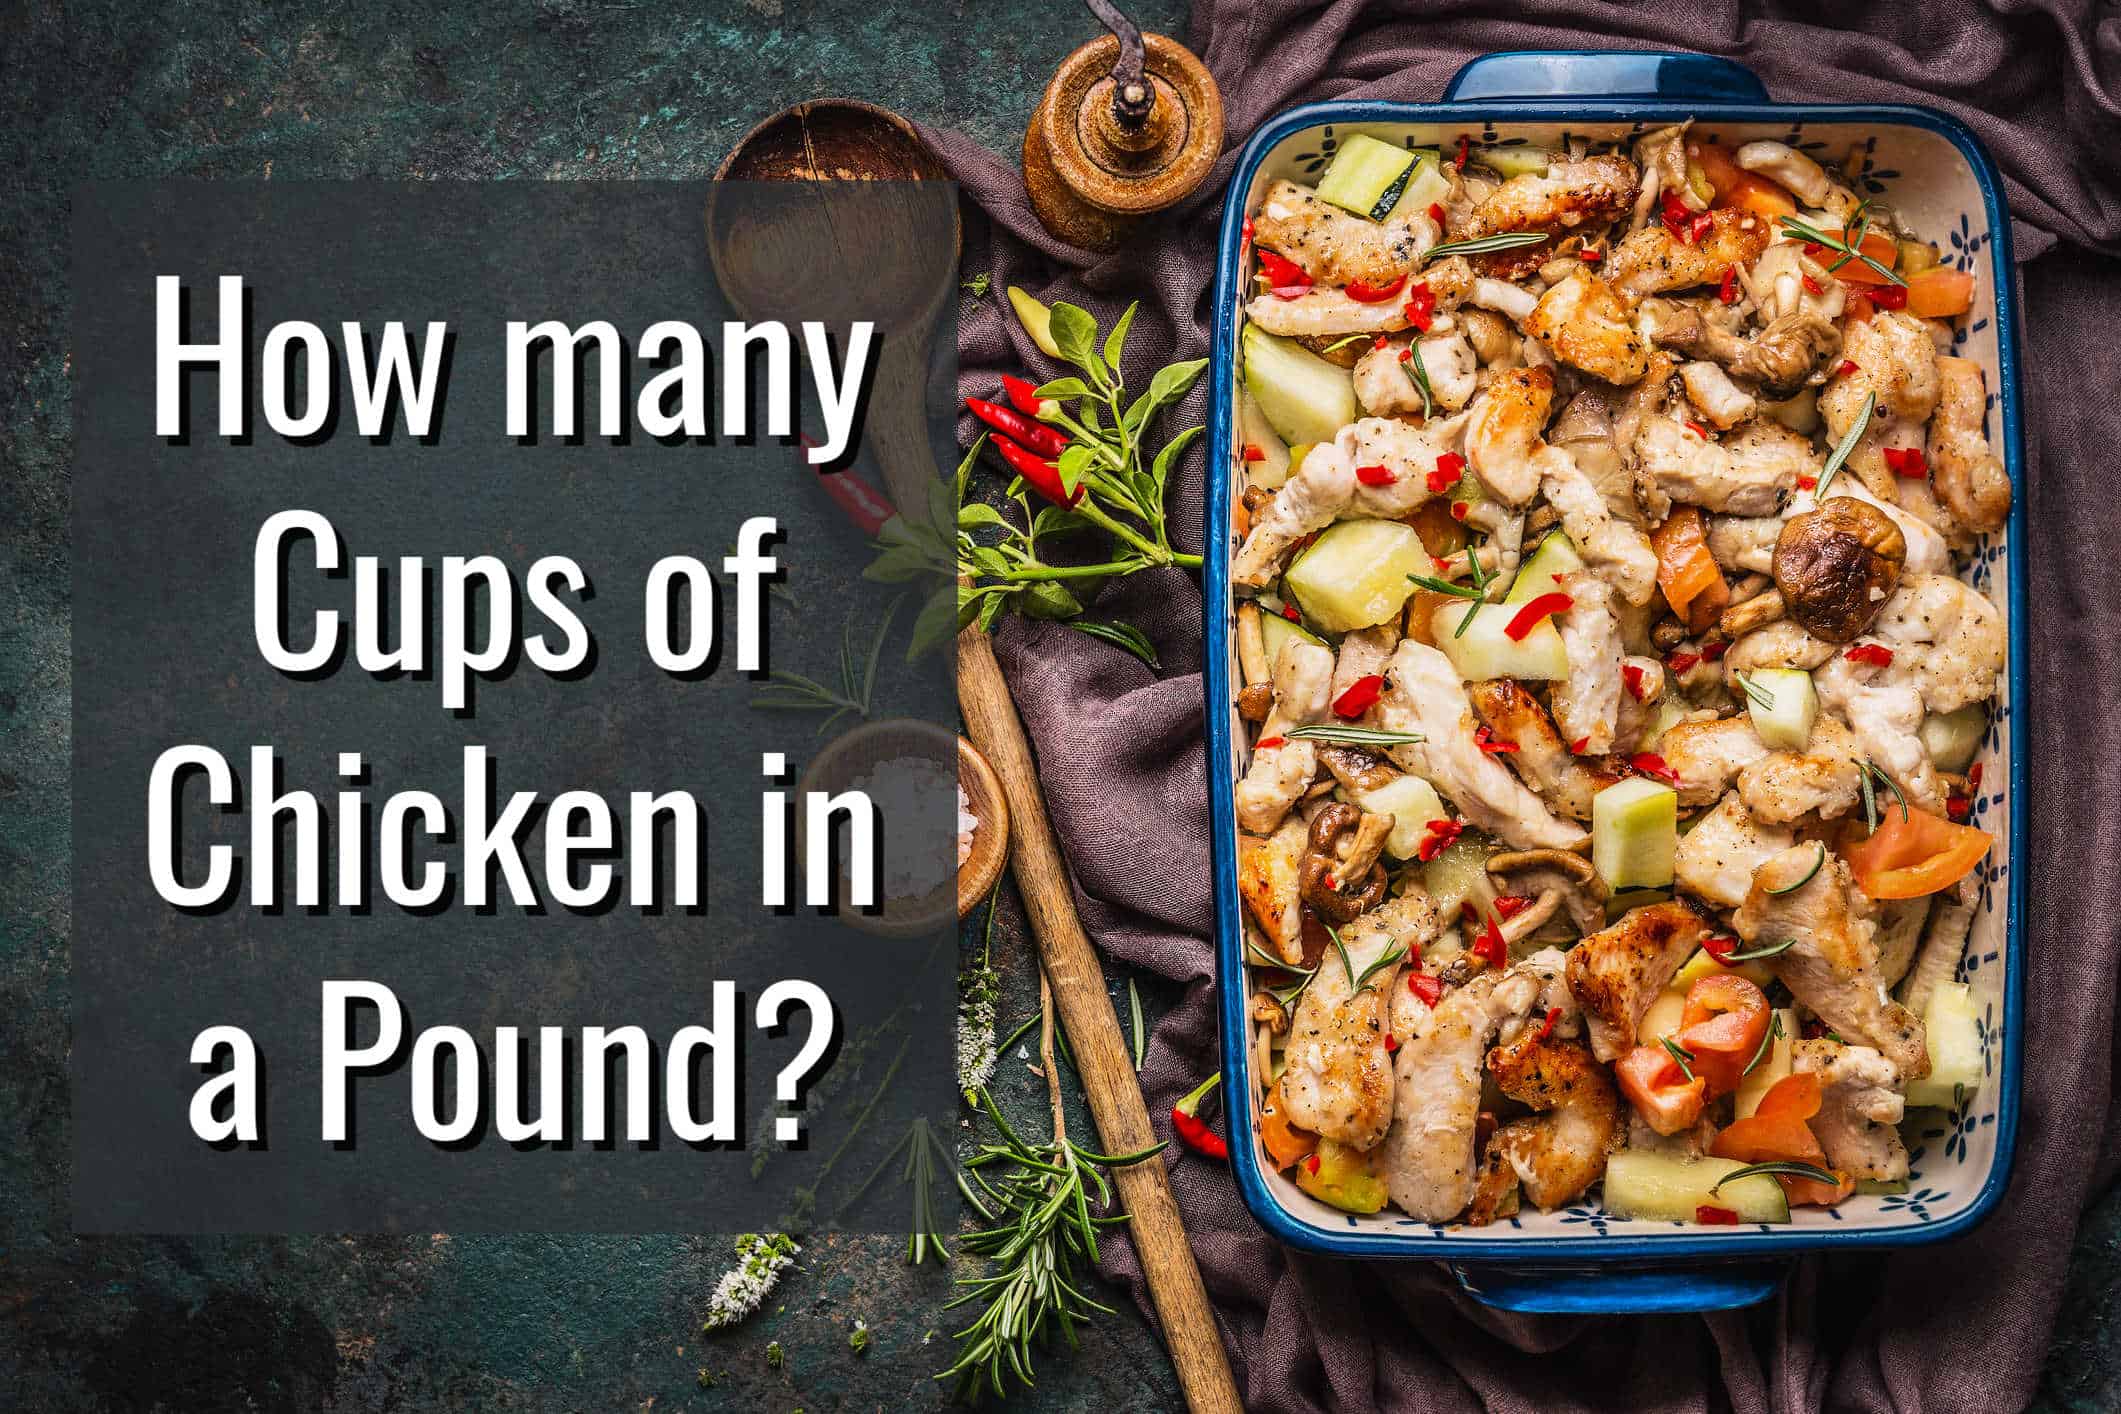 2 Cups of Chicken is How Many Pounds? 